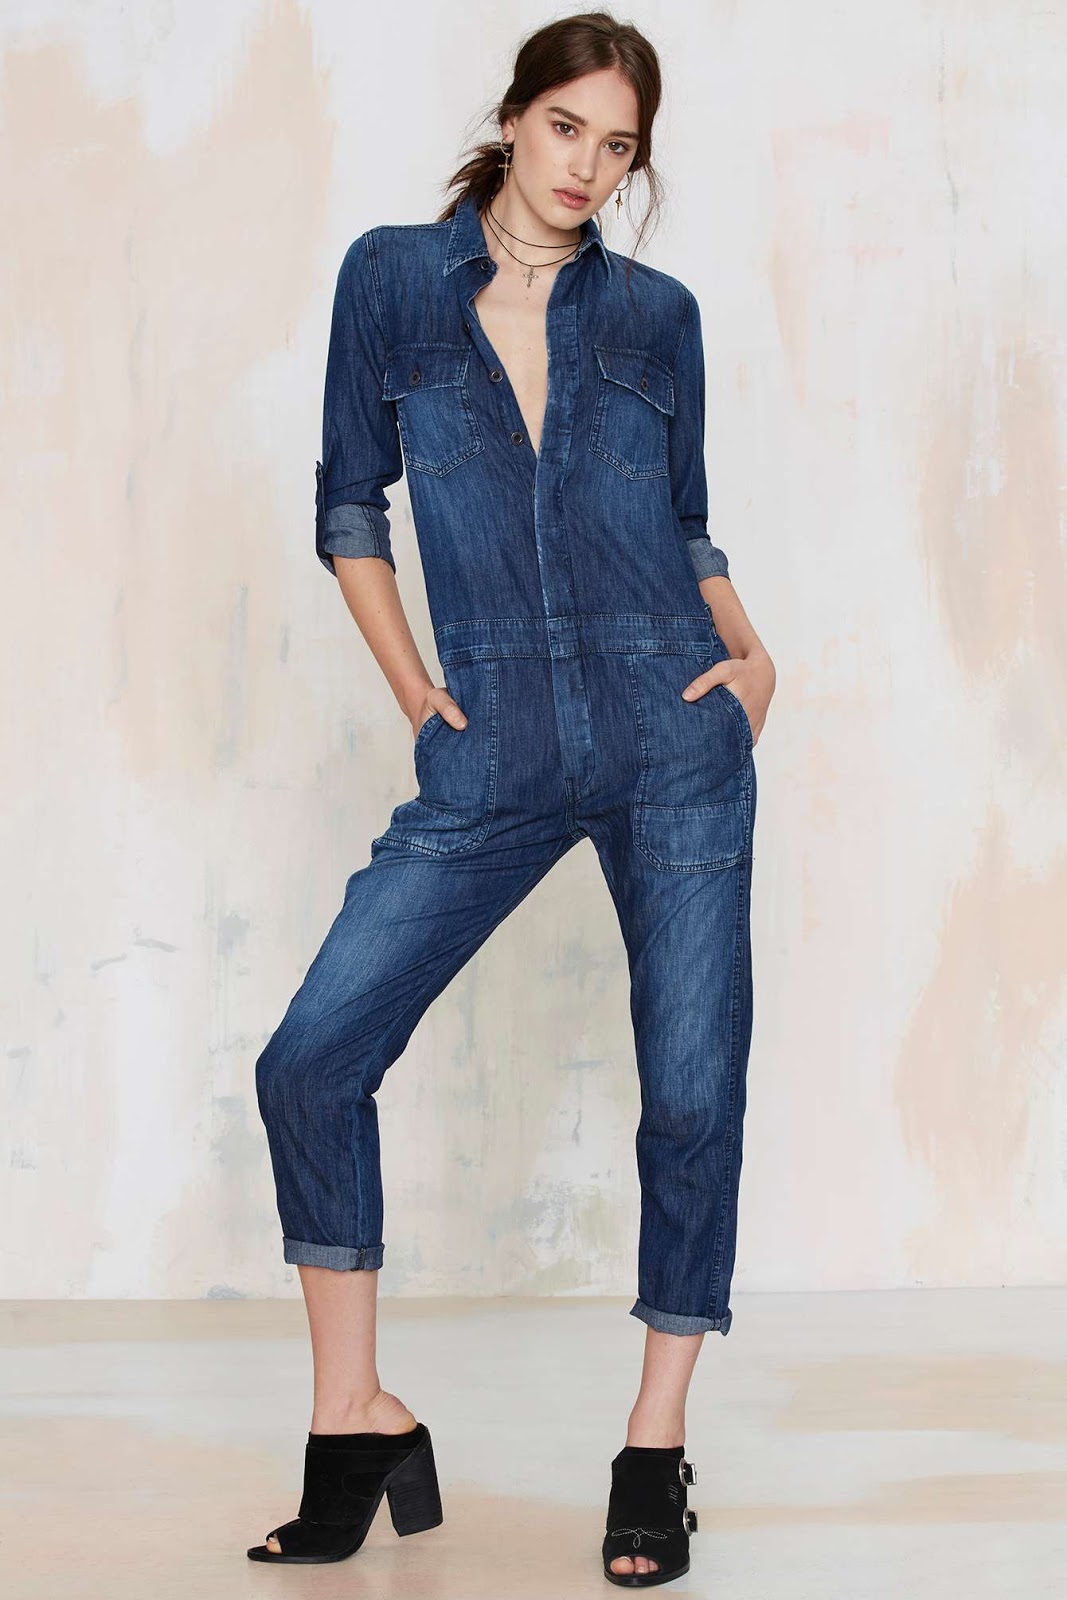 Europe Fashion Men's And Women Wears......: Jeans Jumpsuits That Make ...